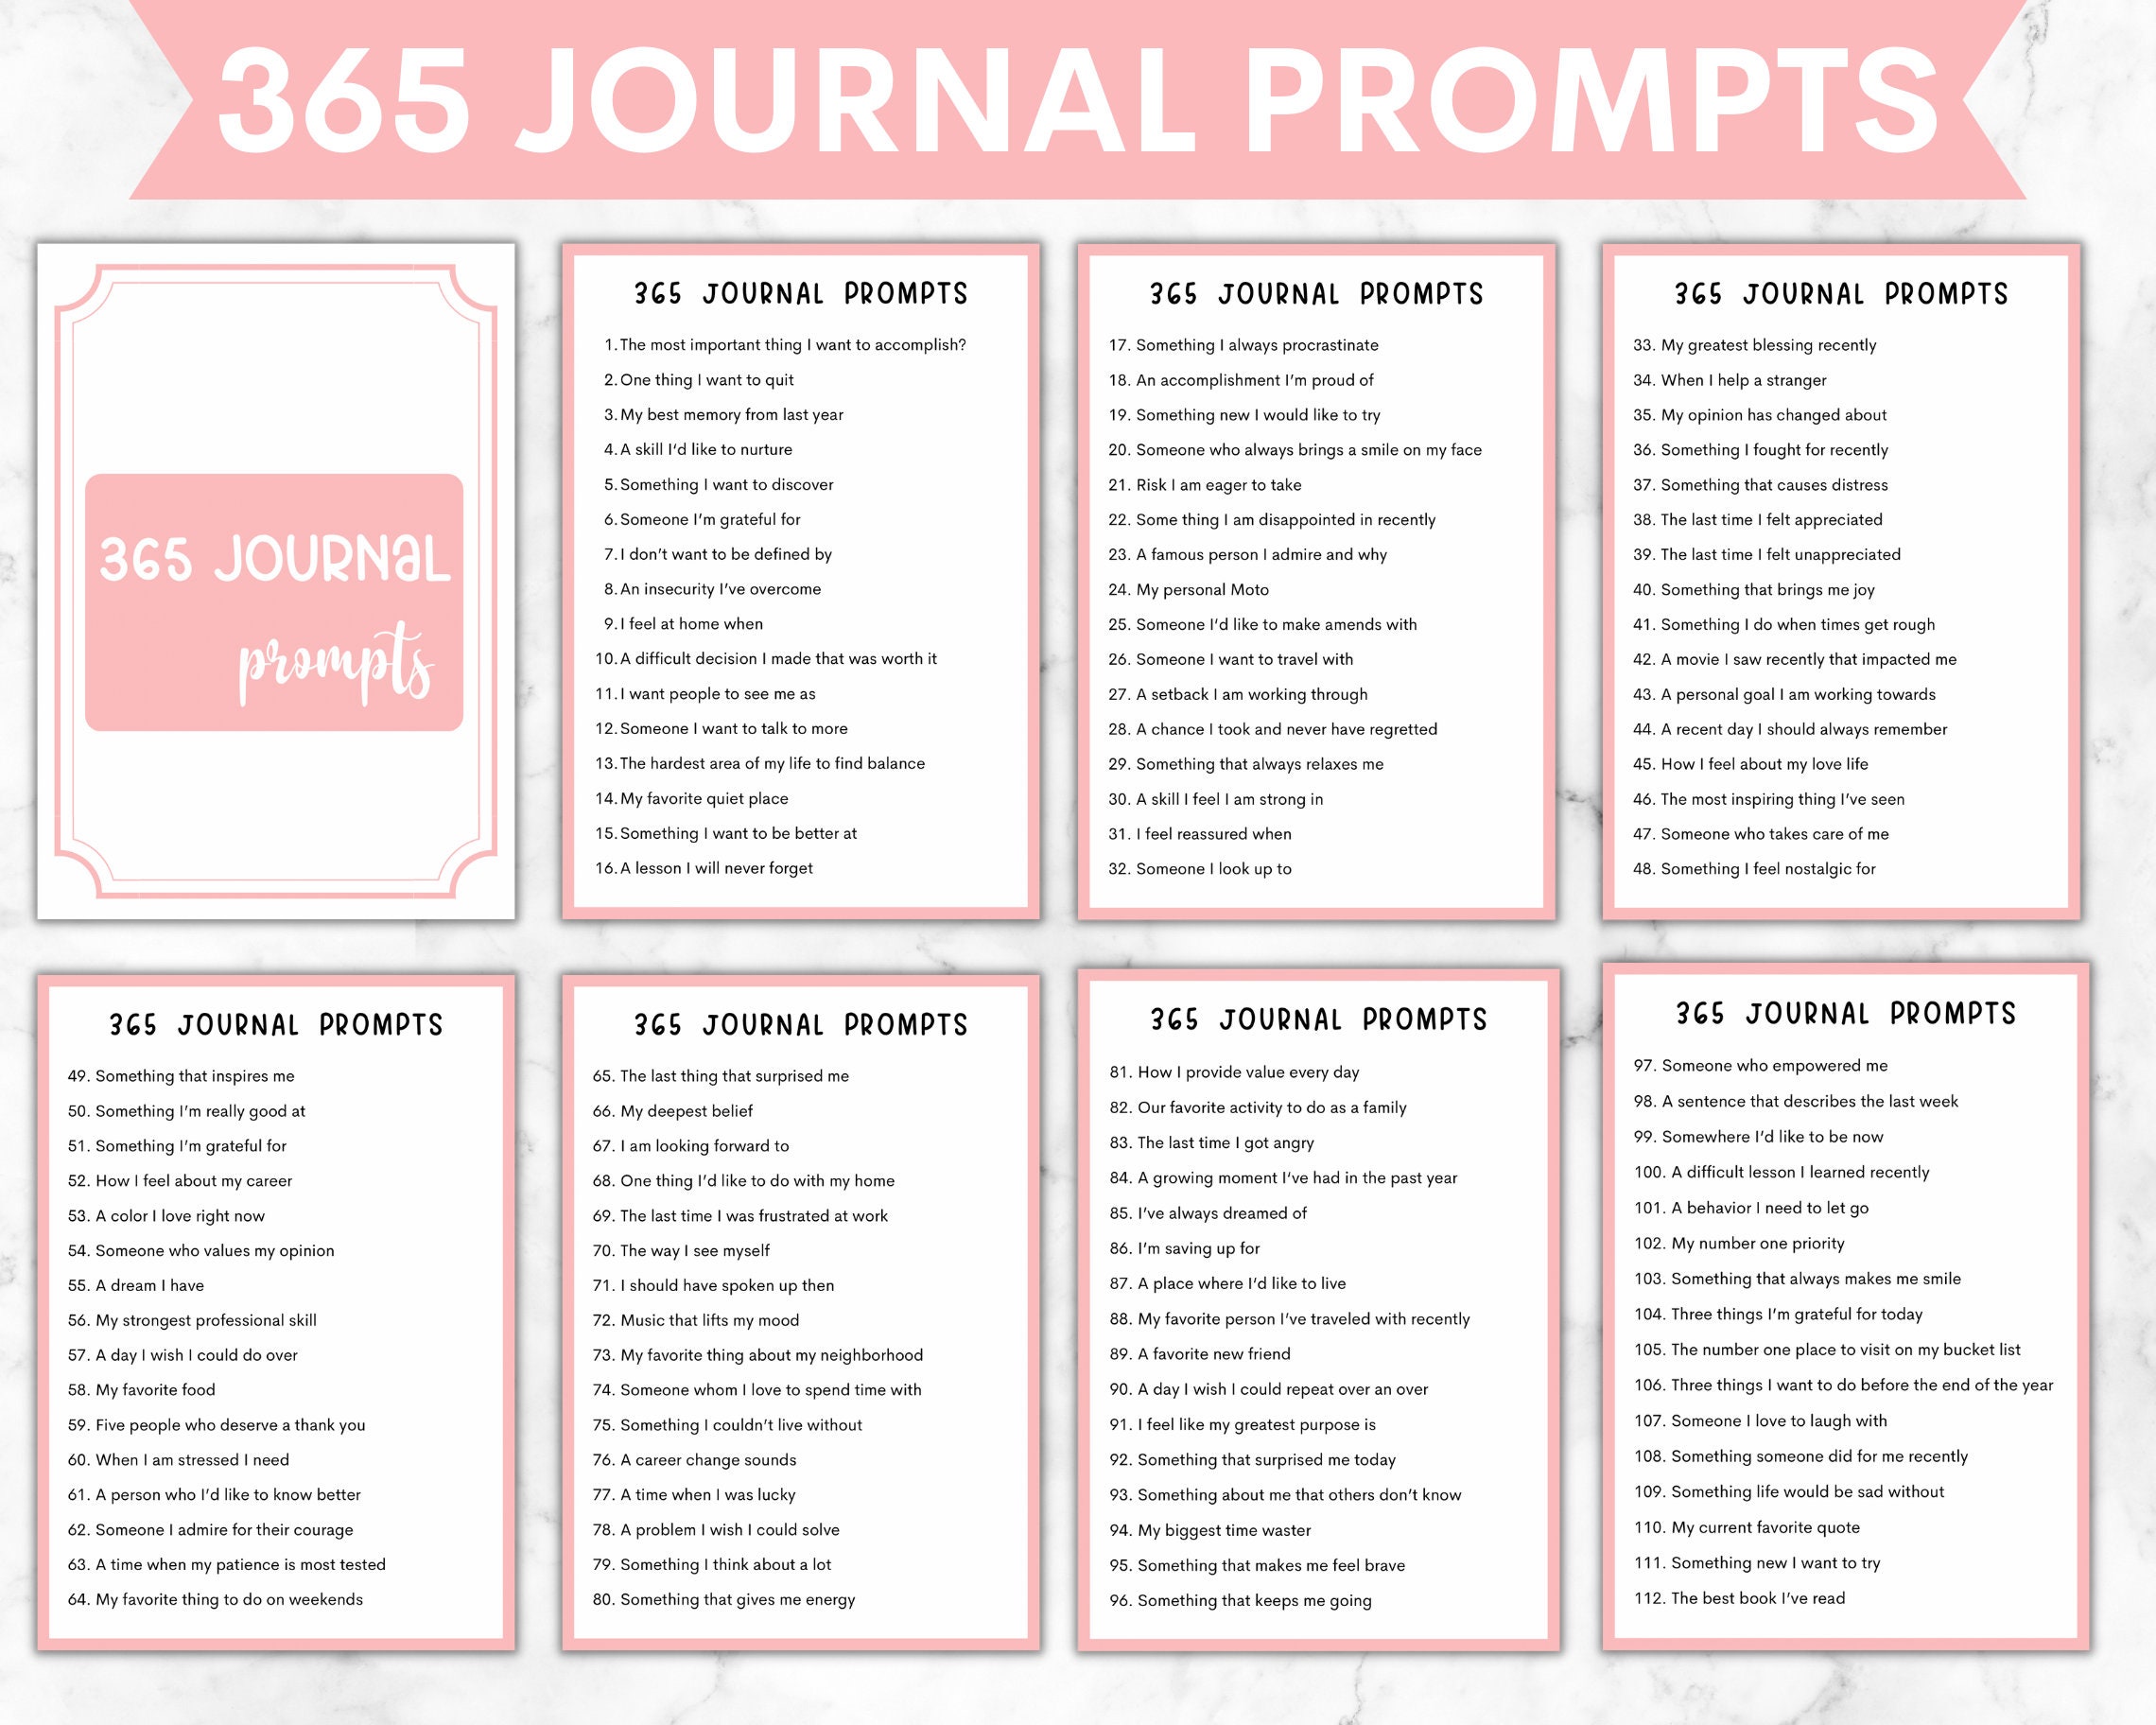 49 [Successful] Relationship Journal Prompts